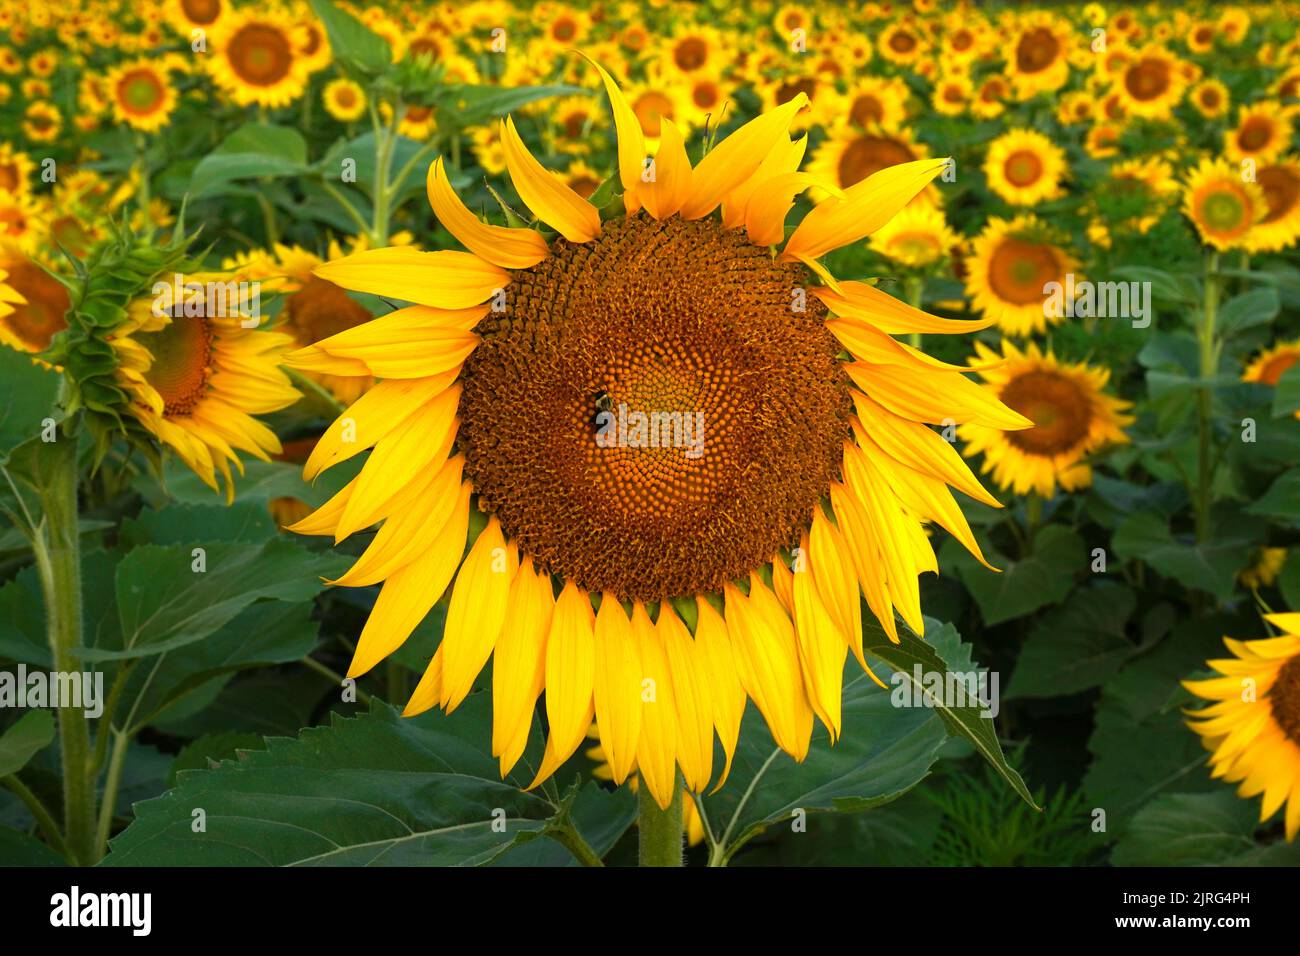 Focus on a sunflower blossum with a bee on it in a field of sunflowers Stock Photo